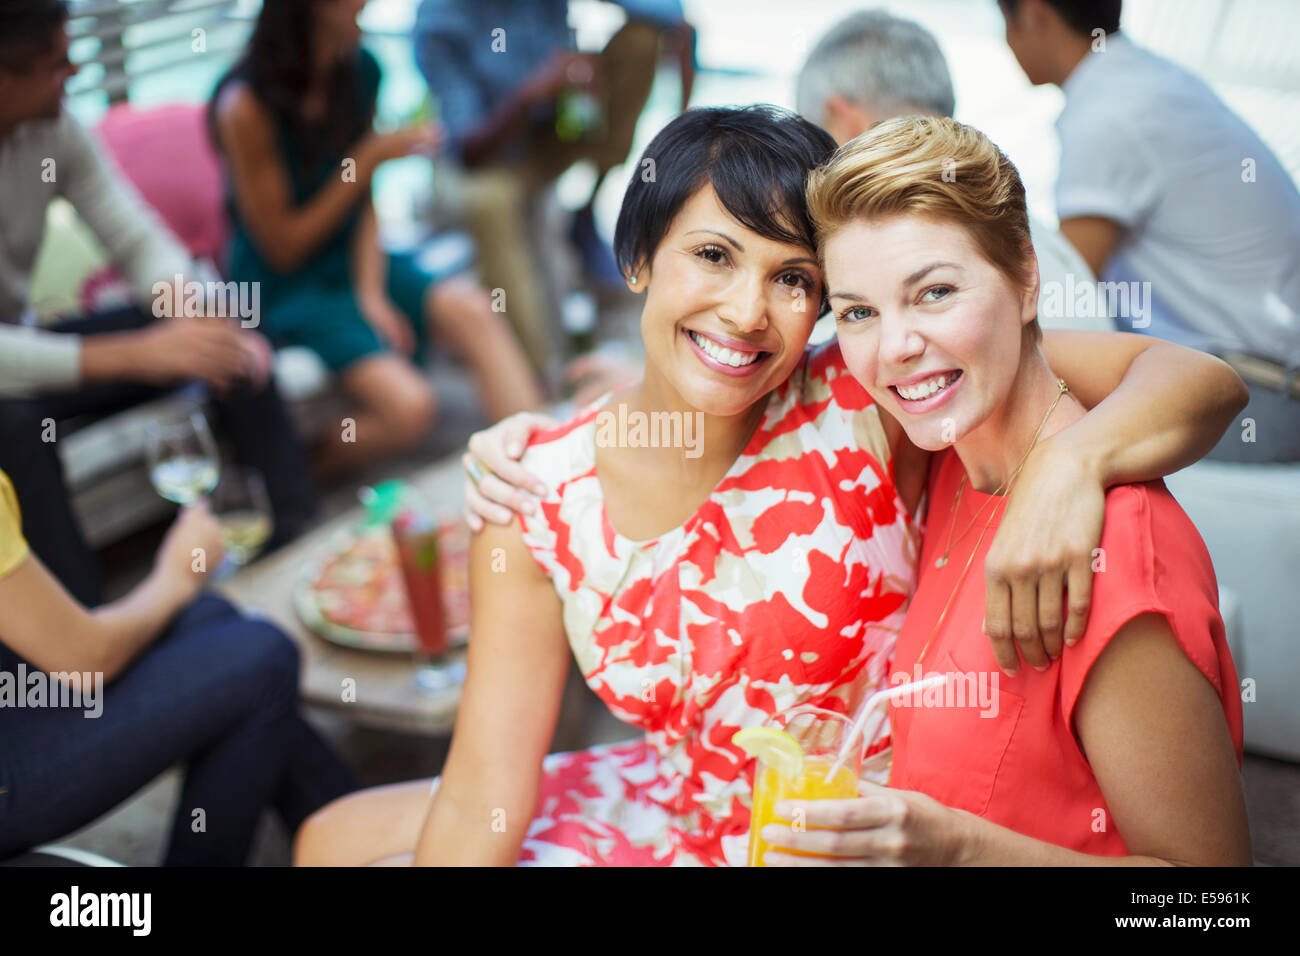 Women hugging at party Stock Photo